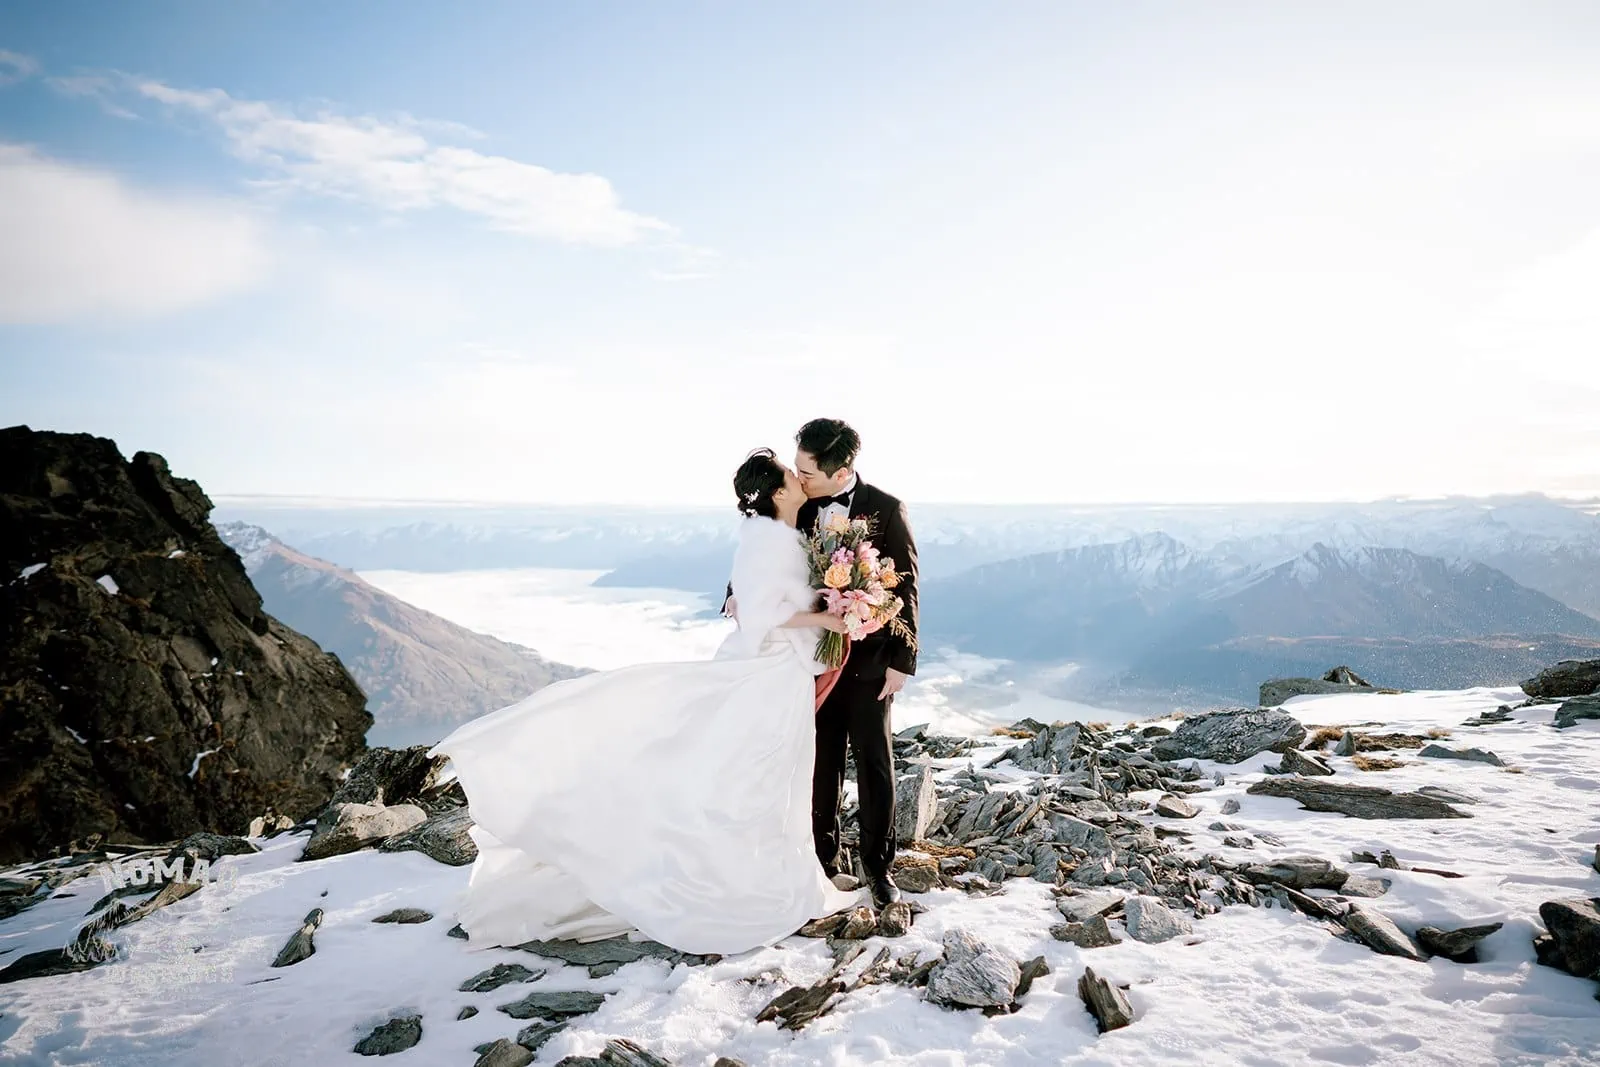 Queenstown New Zealand Elopement Wedding Photographer - Bo and Junyi's heli pre-wedding shoot on a snow-covered mountain with 4 landings.